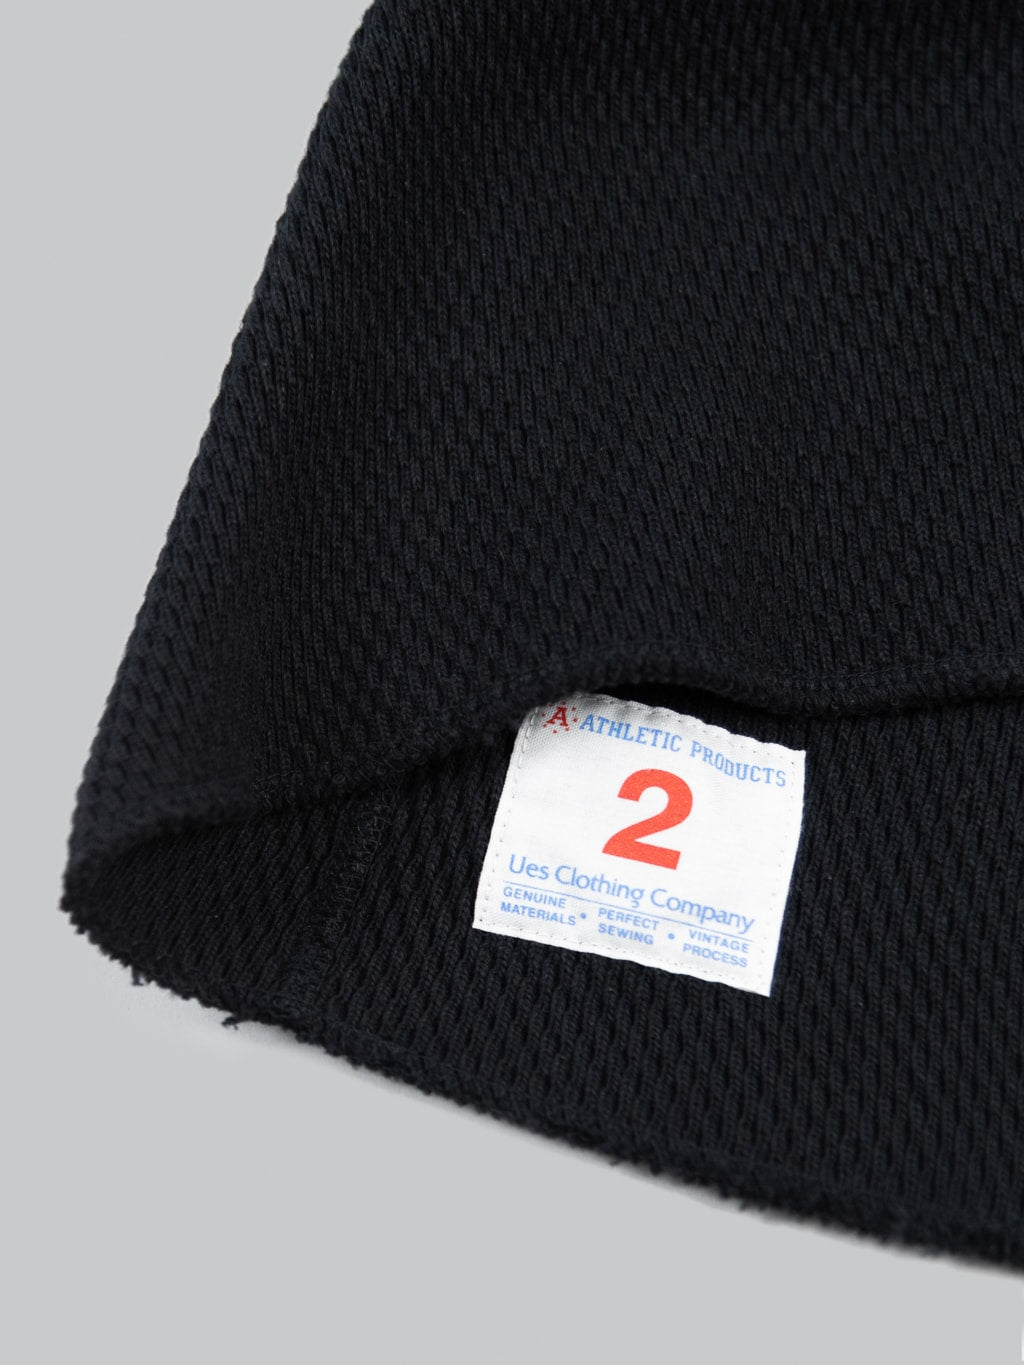 UES Double Honeycomb Thermal TShirt Black knit interior